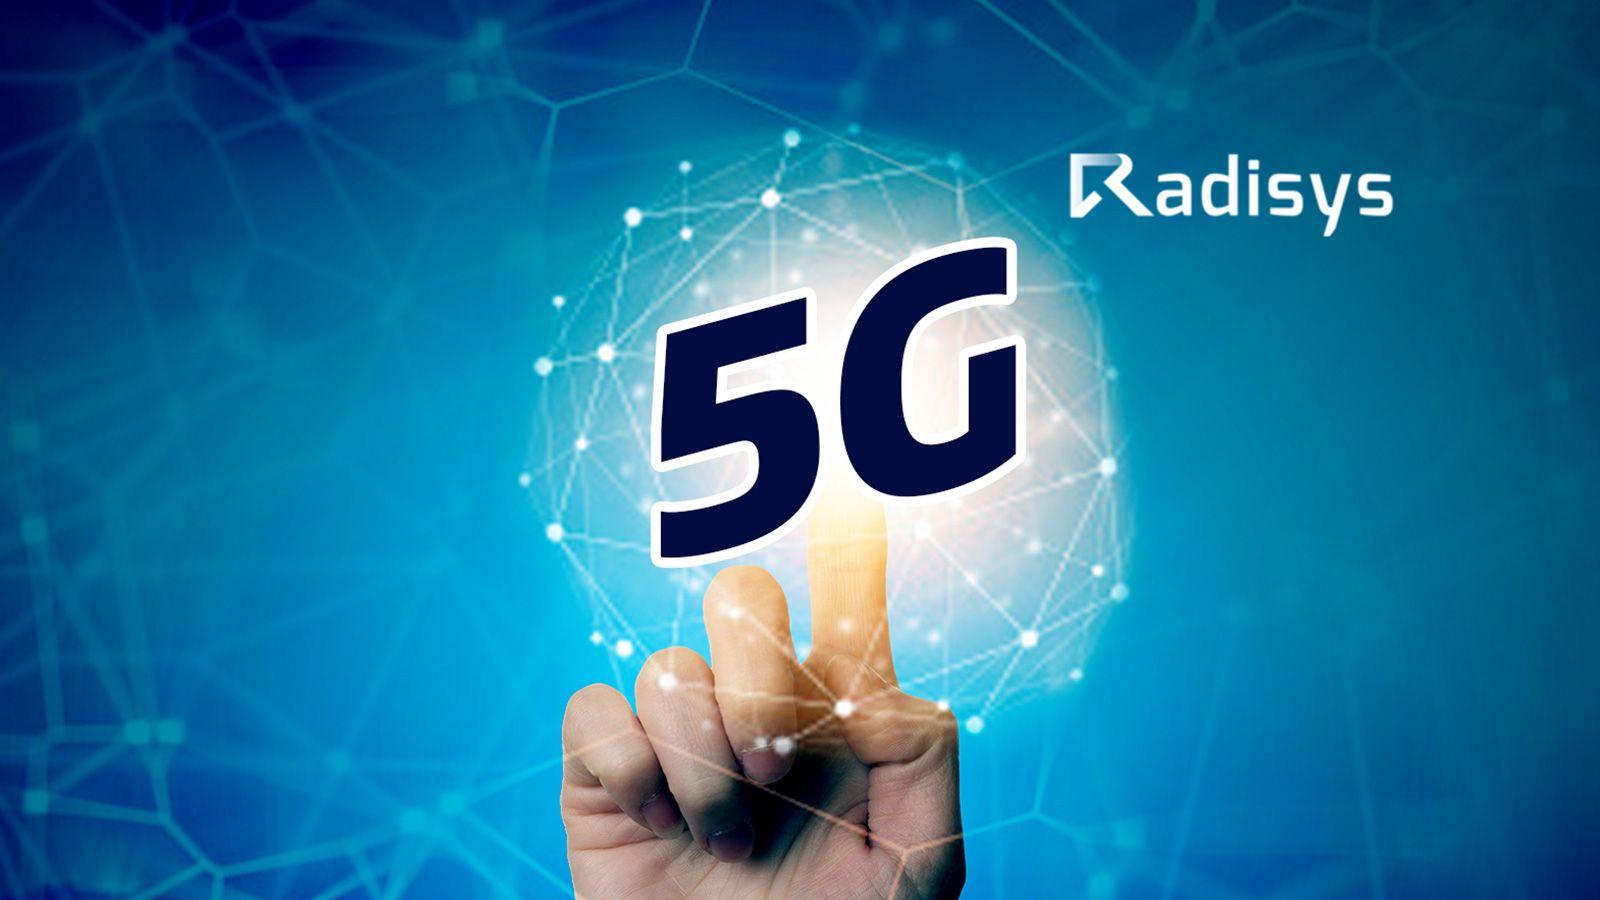 Radisys Logo - Radisys, Intel and China Mobile Team Up for 5G Open RAN Architecture